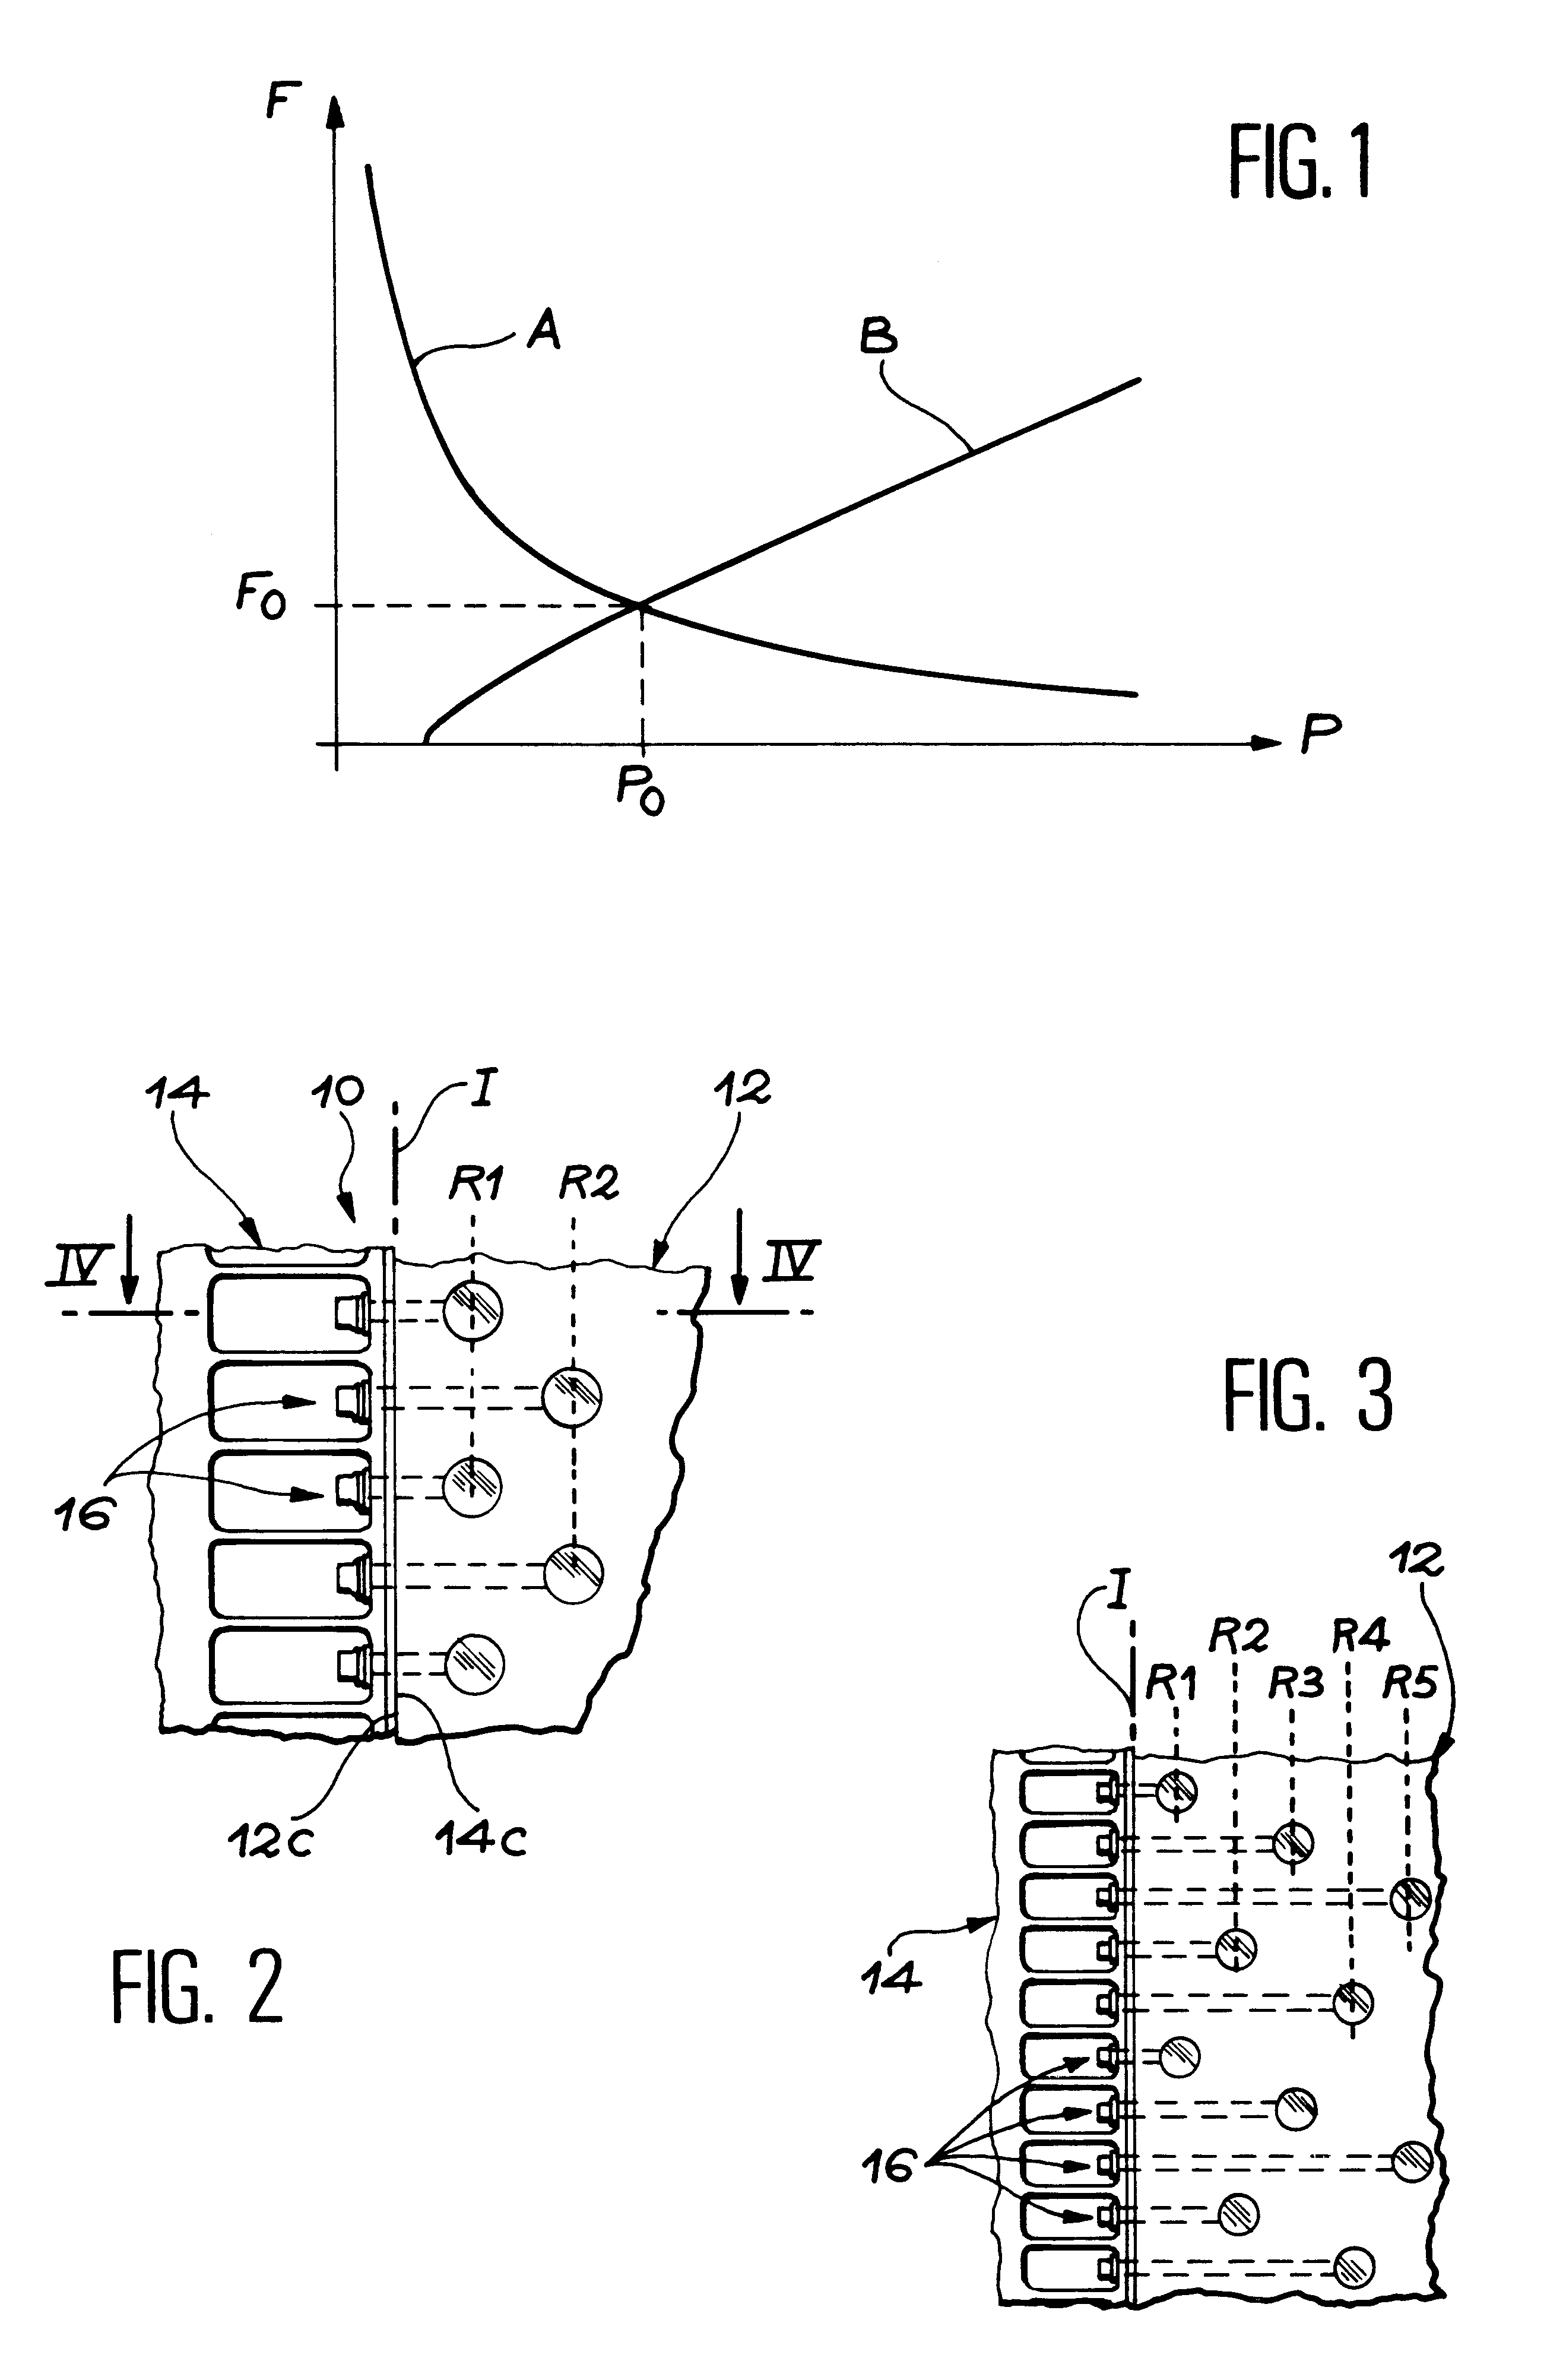 Device for joining a panel and a structure, able to transmit significant forces